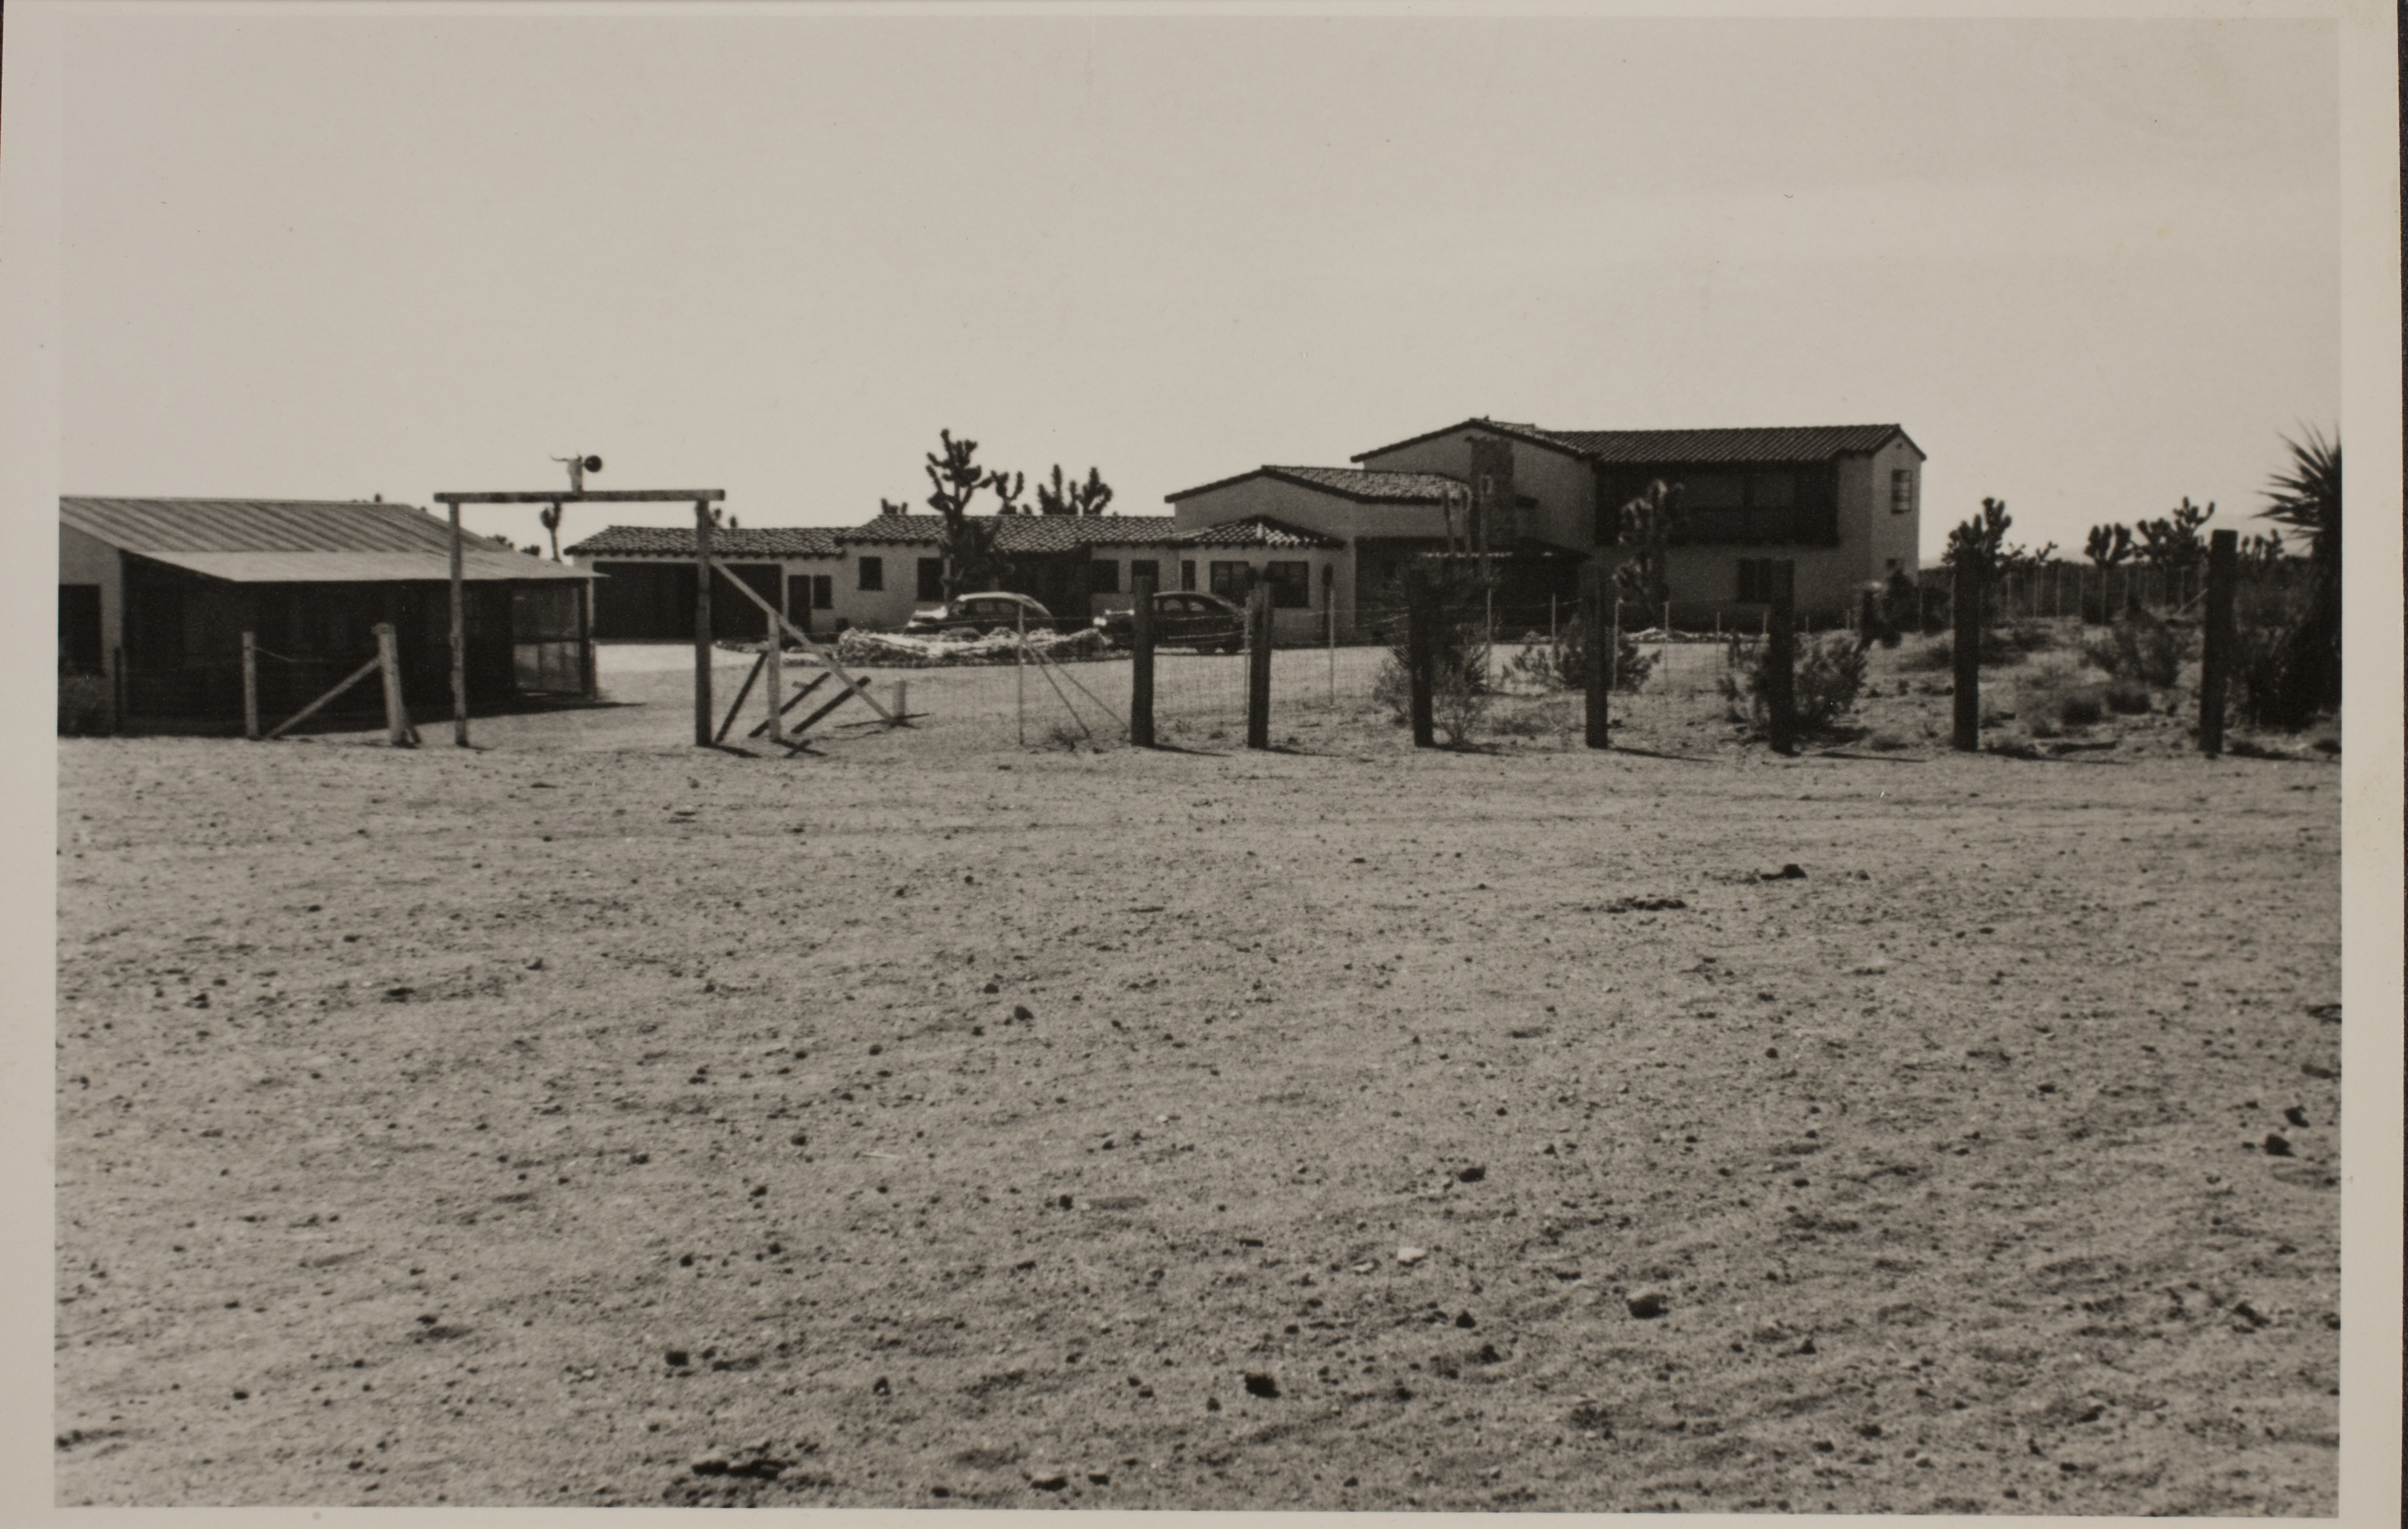 The Walking Box Ranch from the front gate.  The bunkhouse is visible on the left and the ranch house in the center: photographic print